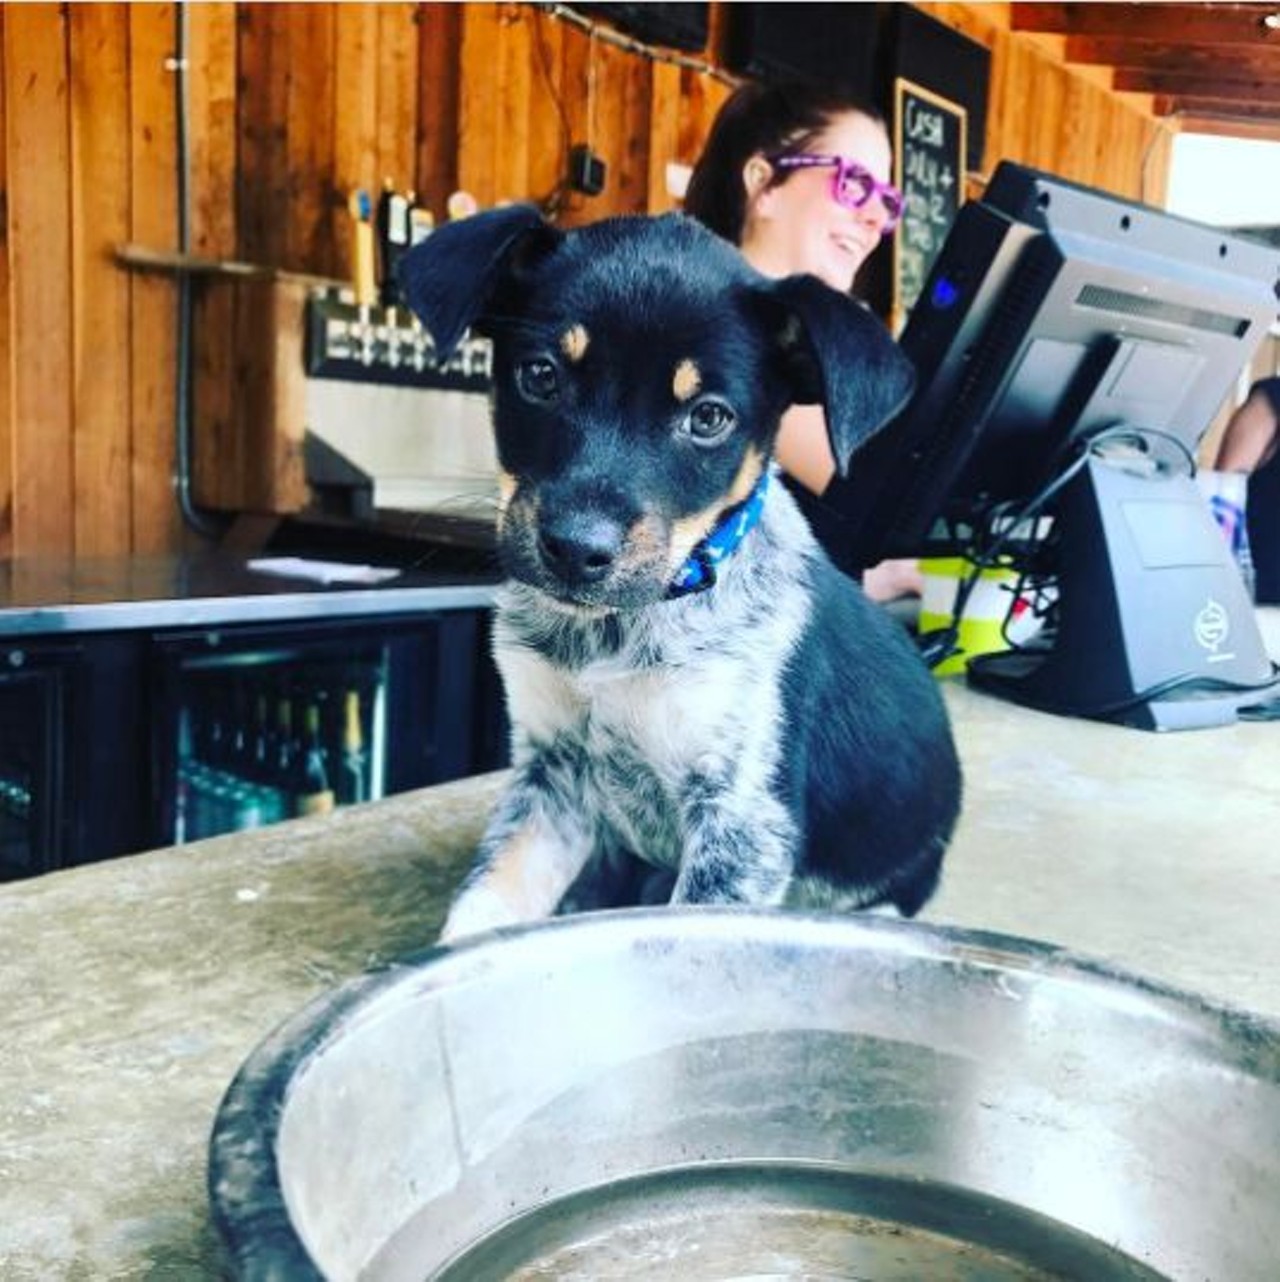 The Friendly Spot Ice House  
943 S. Alamo St., (210) 224-2337 
Catch a game on the Friendly Spot&#146;s huge projector screen while sipping on an ice-cold beer. Your pet will love the outdoors and all of the other four-legged friends that are sure to be there.
Photo via Instagram, taytayindawind